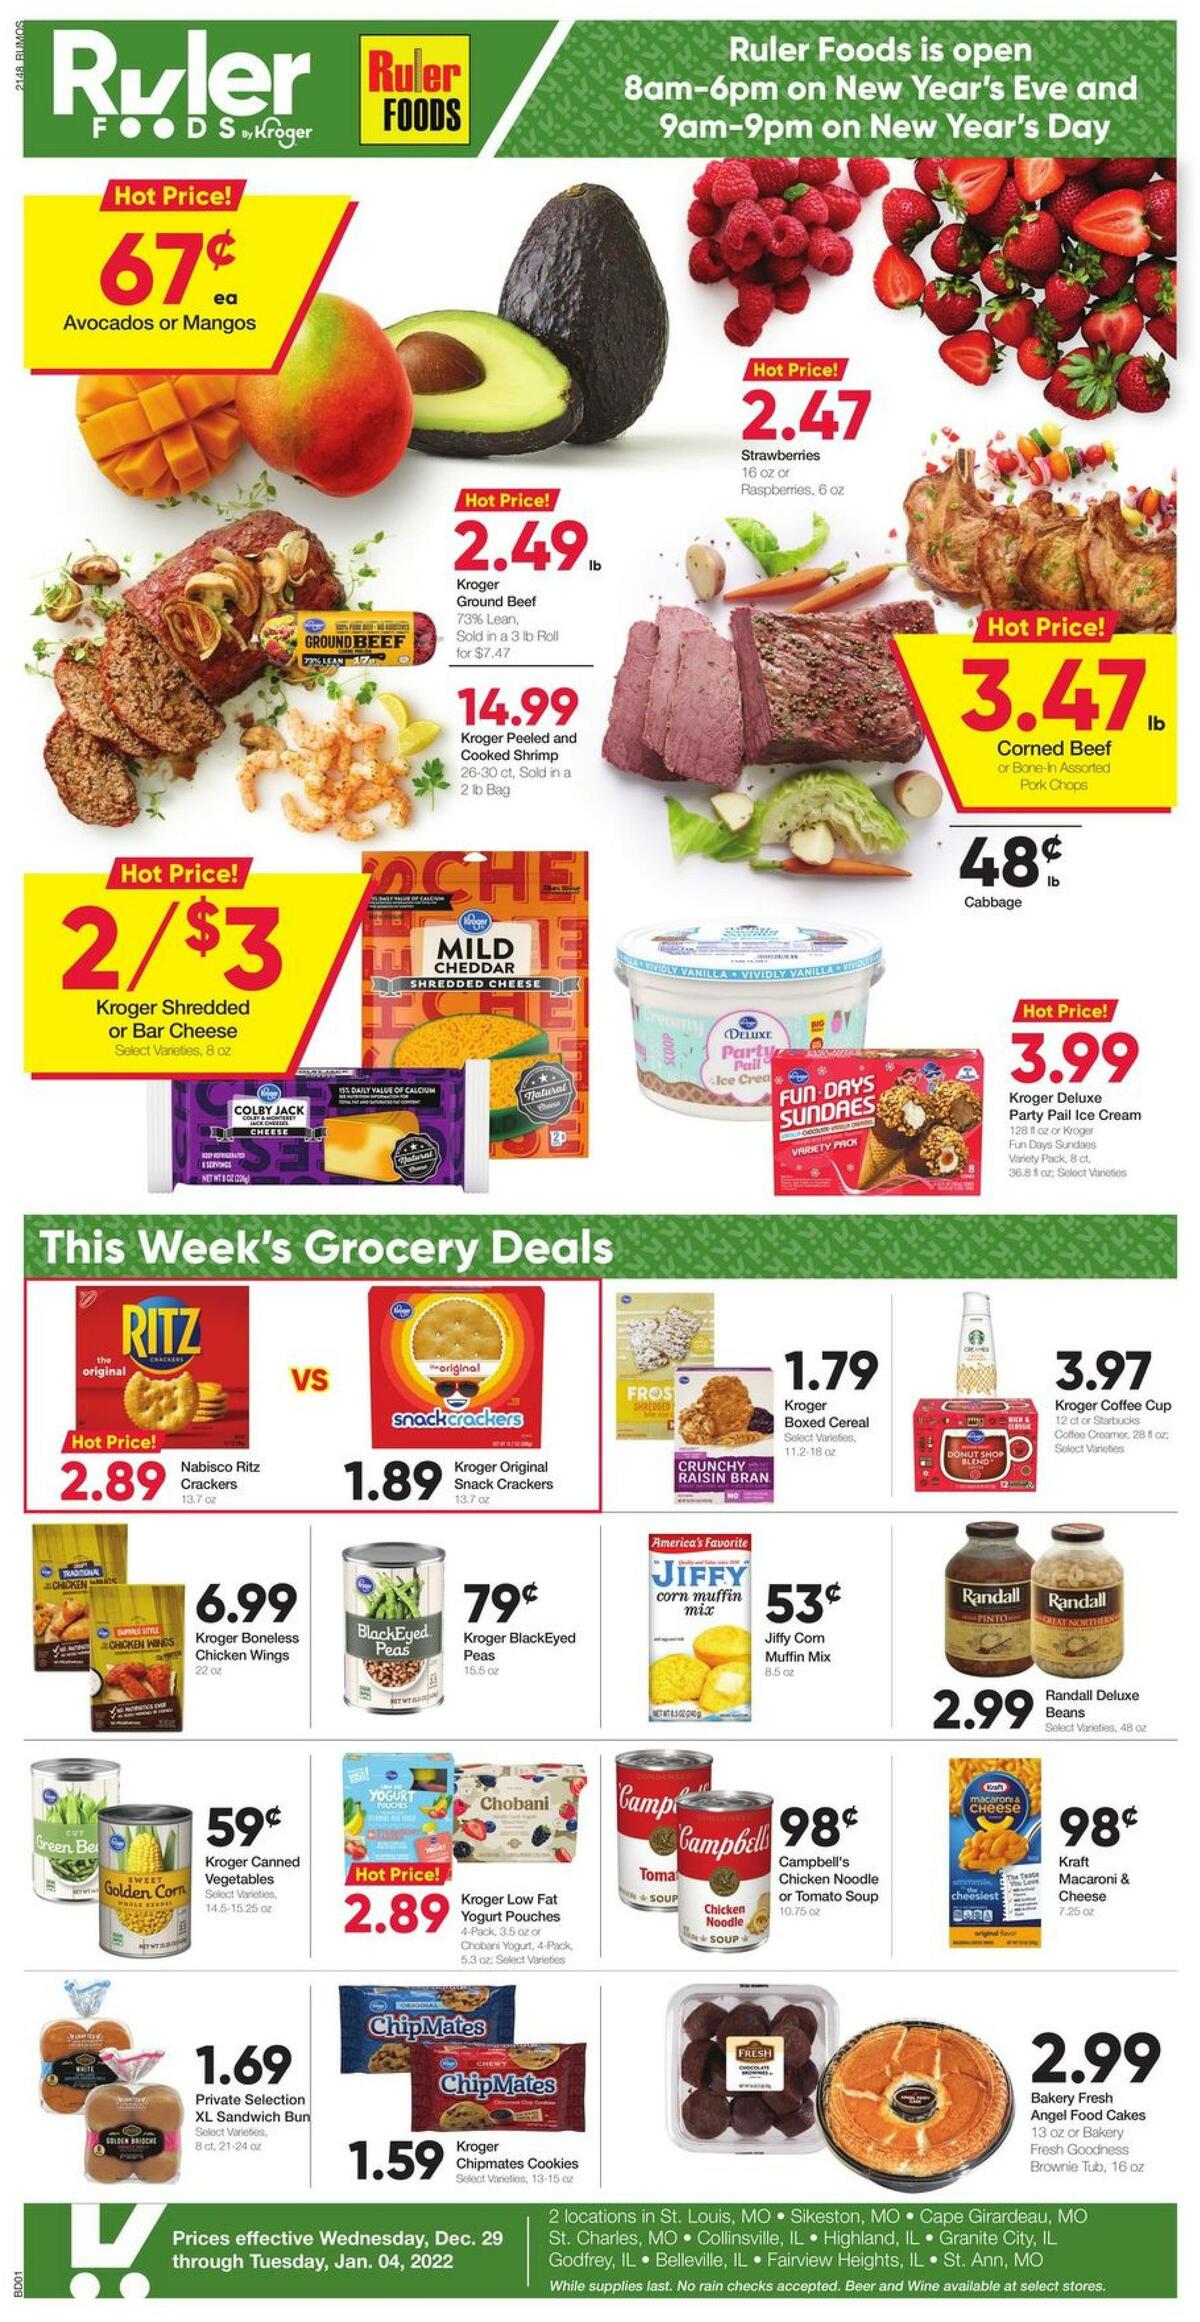 Ruler Foods Weekly Ad from December 29